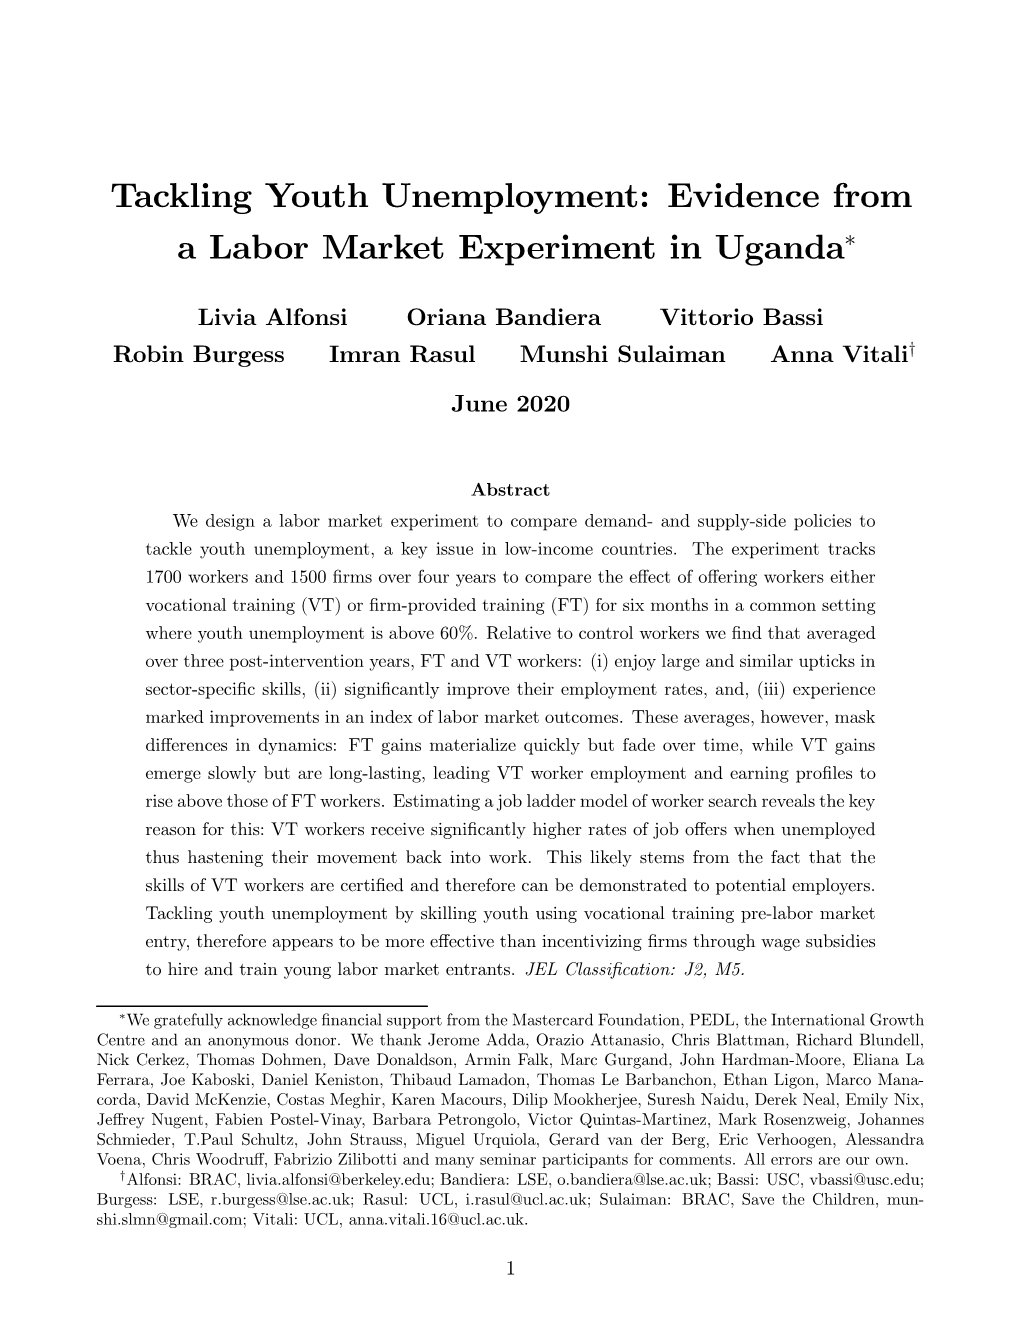 Tackling Youth Unemployment: Evidence from a Labor Market